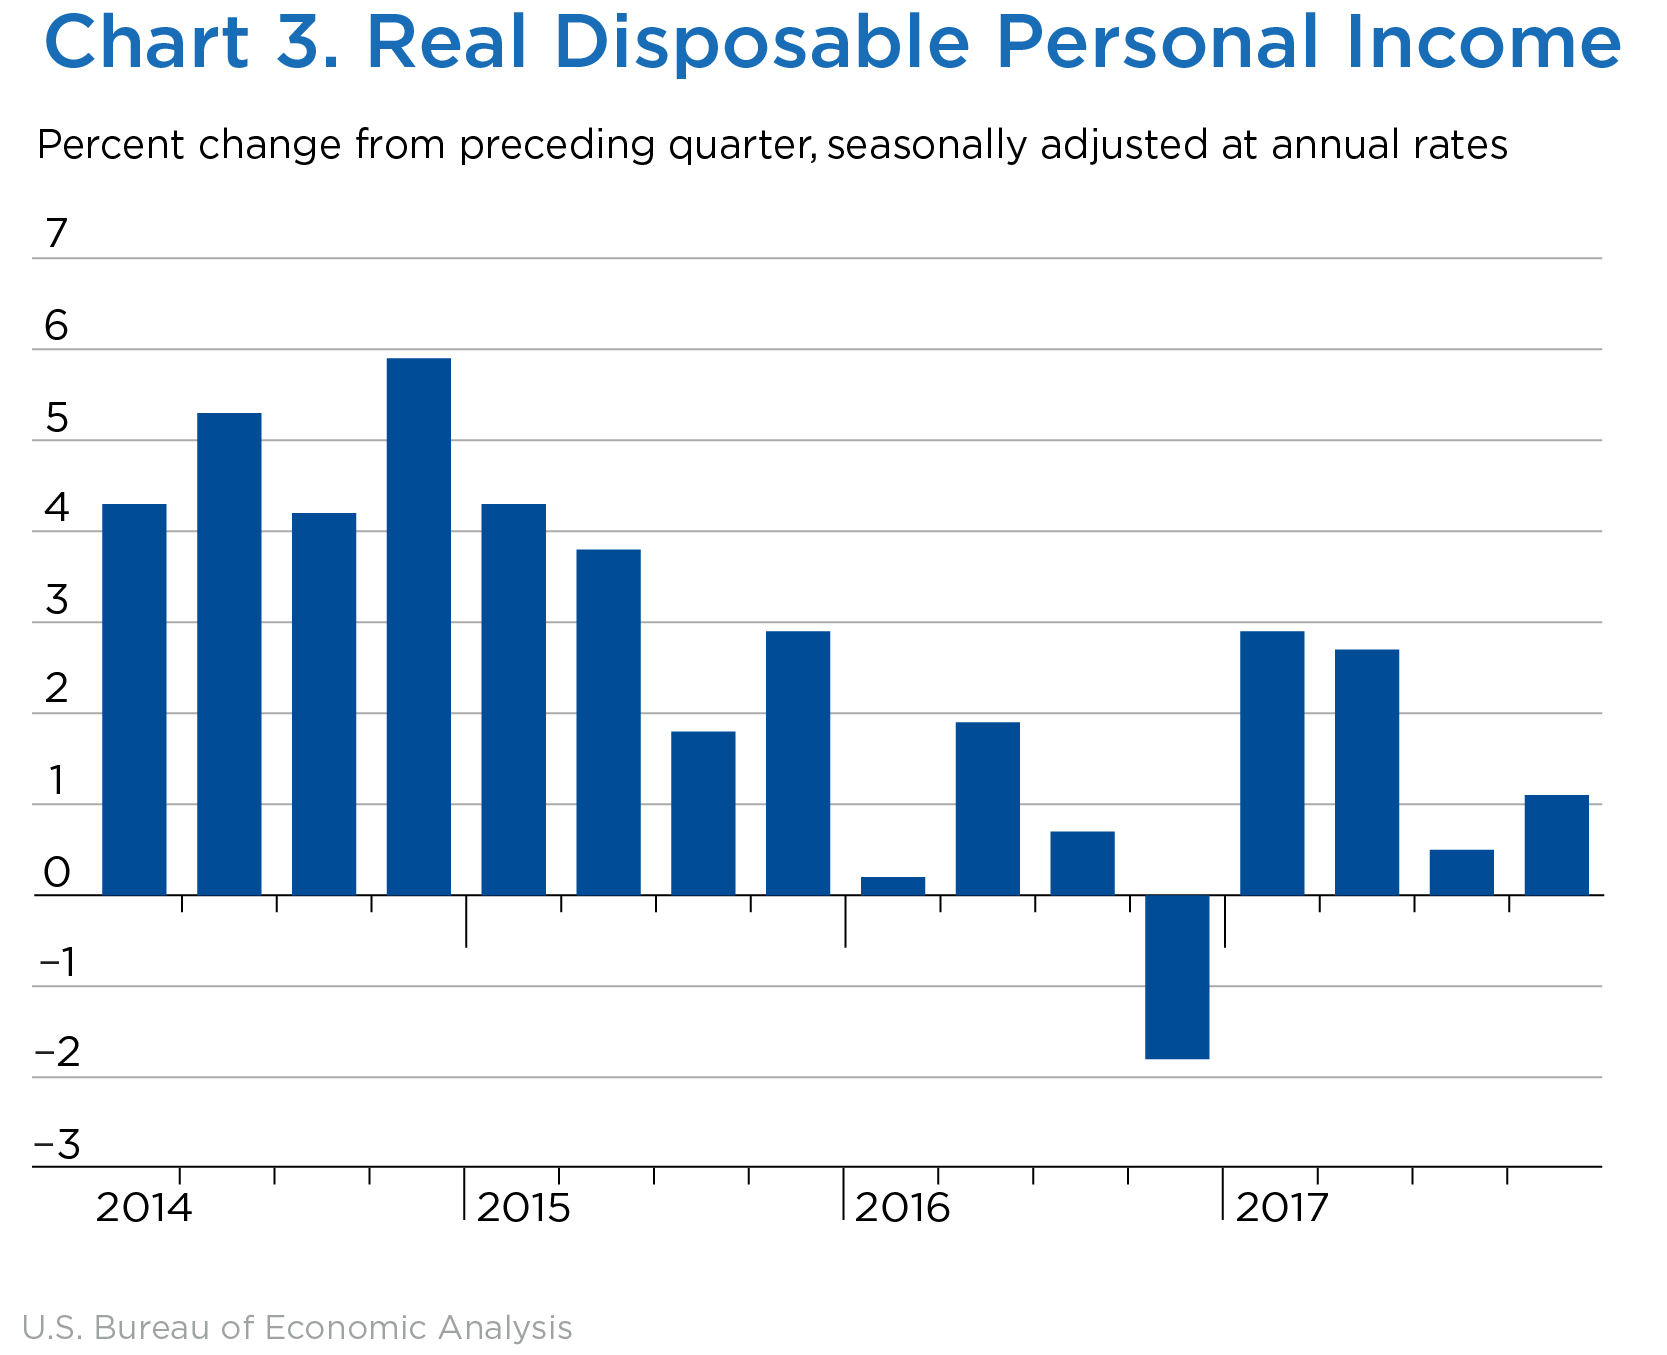 Chart 3. Real Disposable Personal Income, Bar Chart